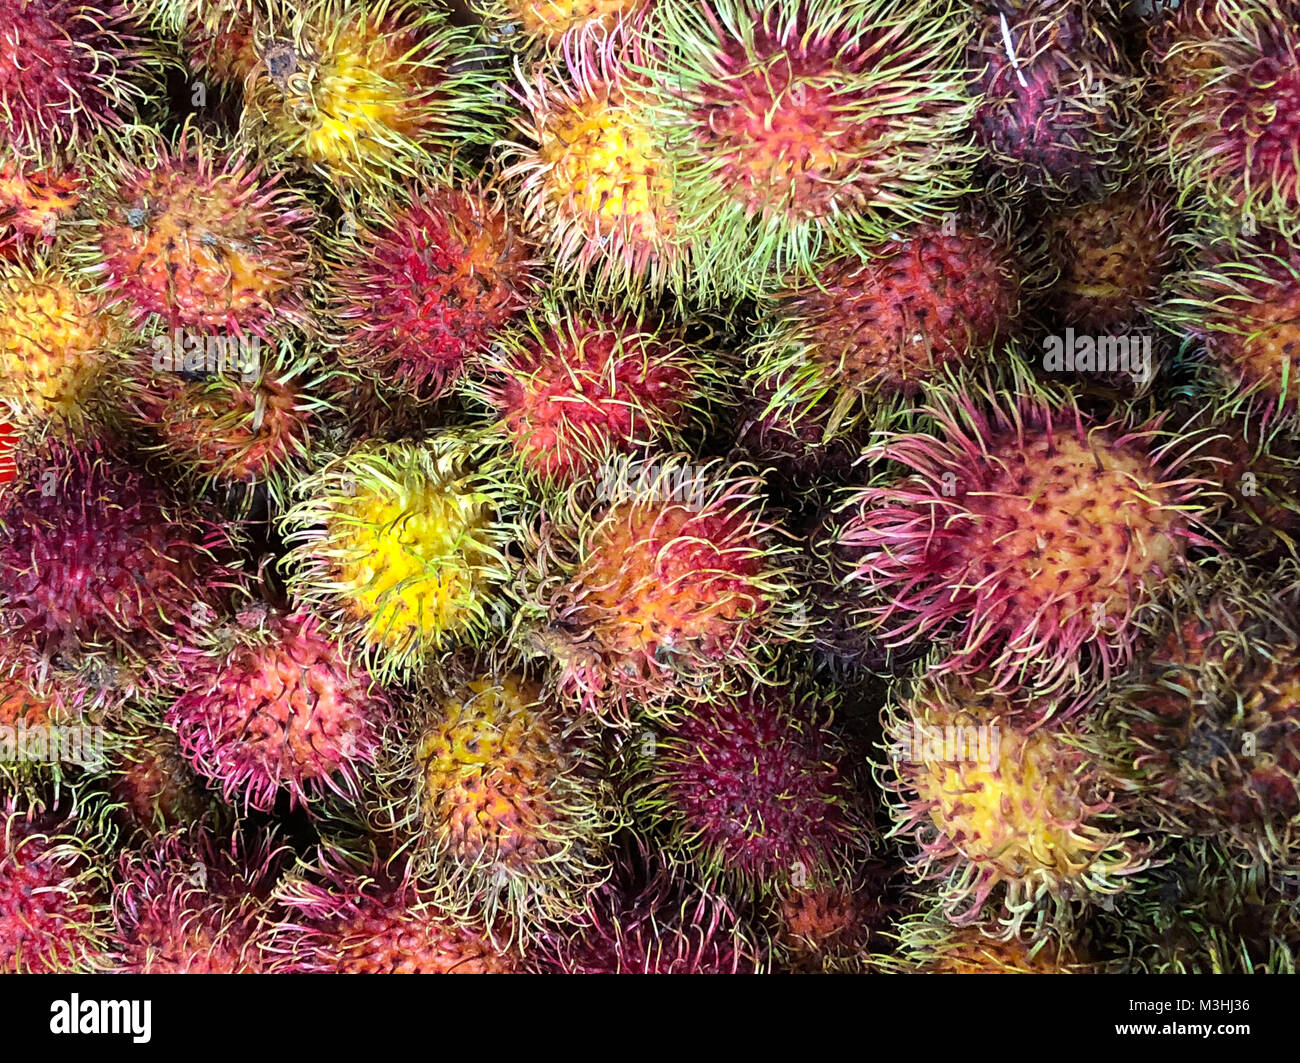 A large group of colorful Rambutan fruit fills the frame.  wallpaper background Stock Photo